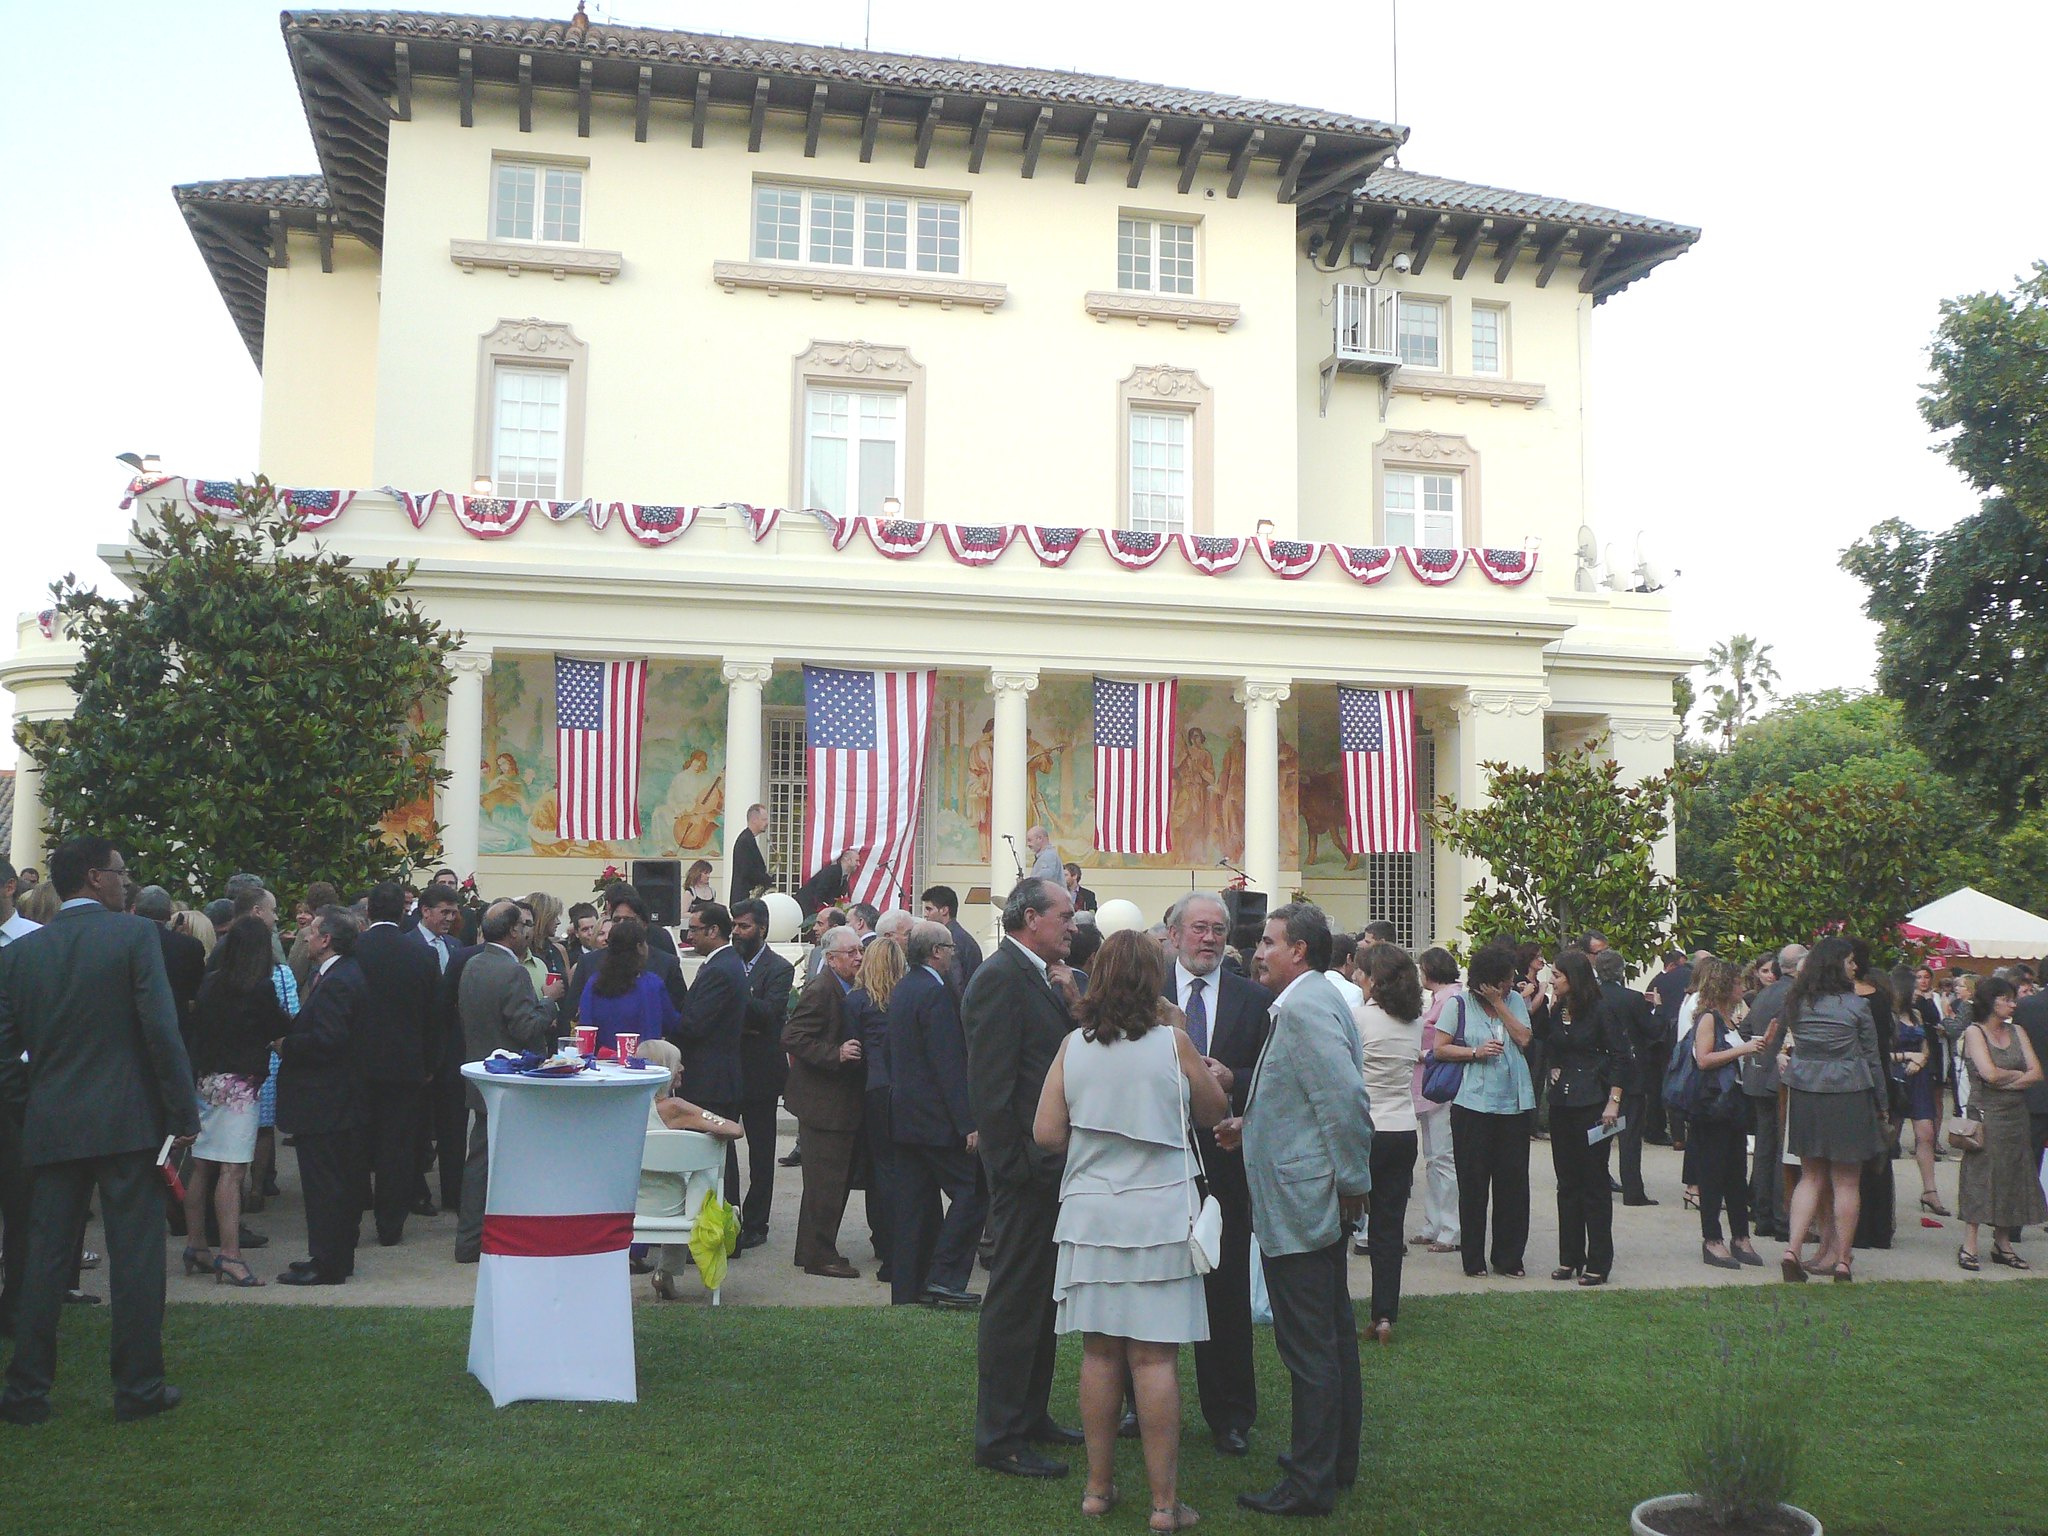 U.S. Independence Day Party at the Consulate, June 30th, 2011. Photo: Flickr